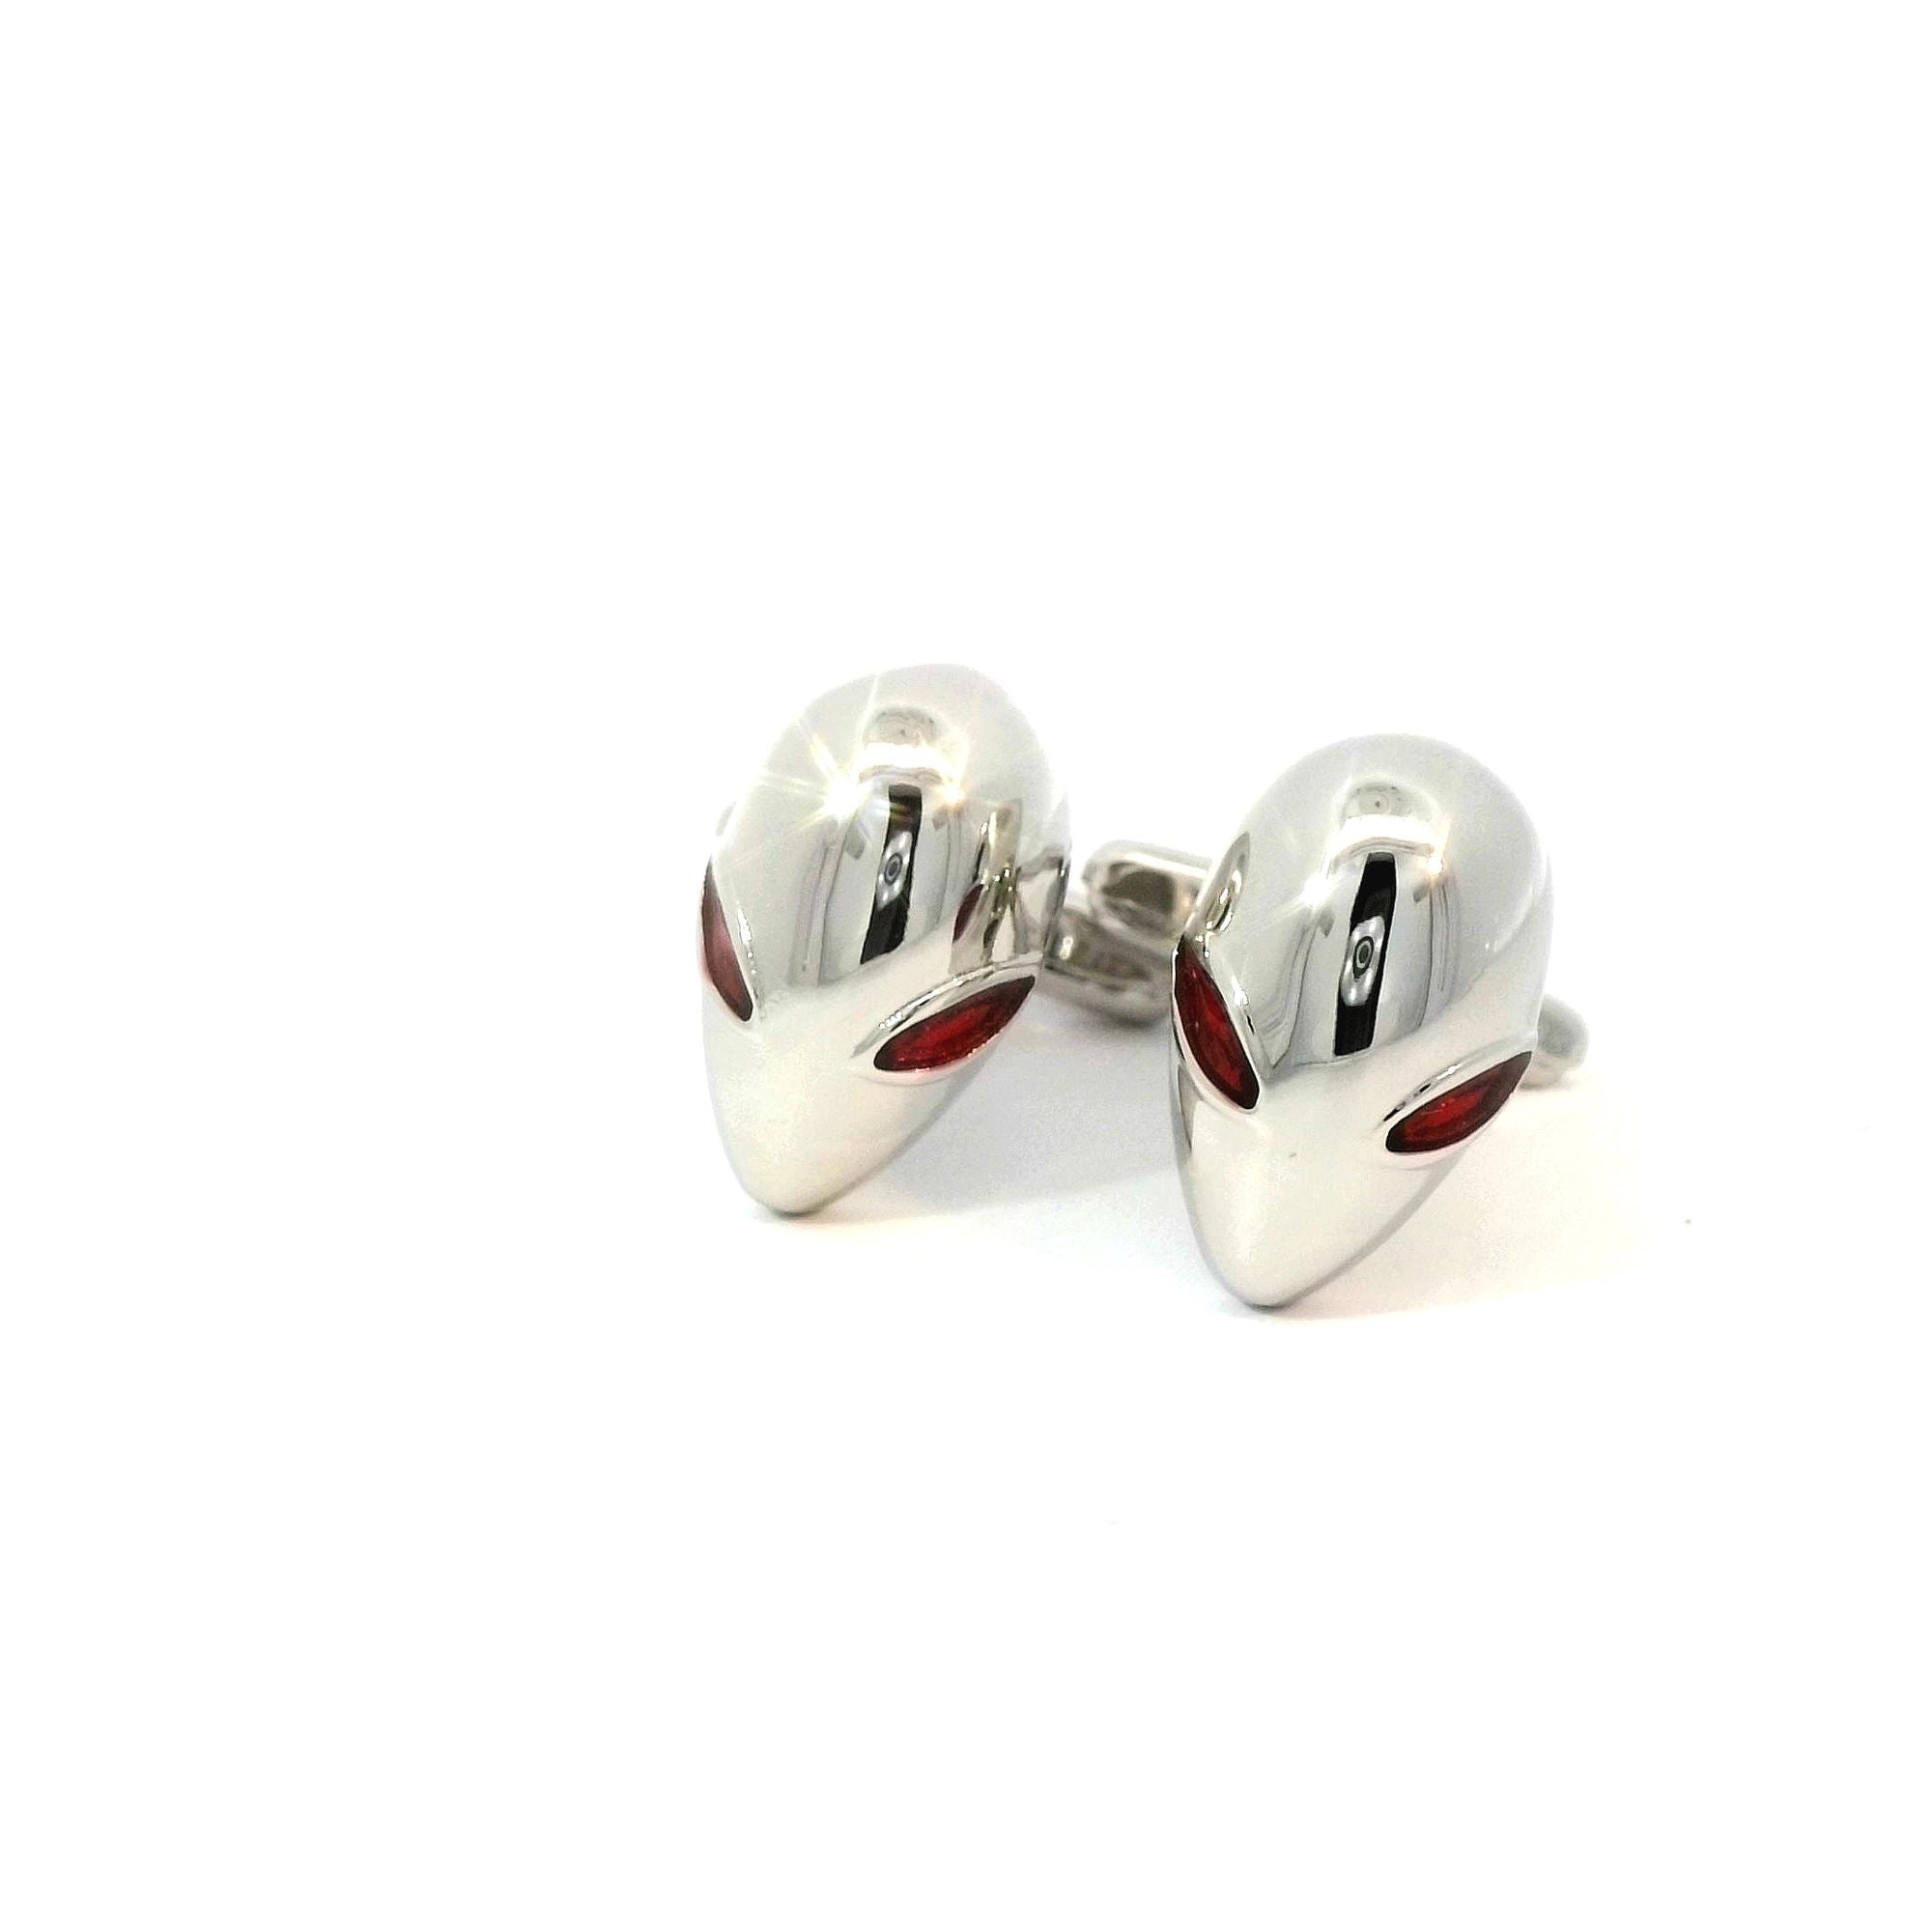 Aliens with Red Crystal Eyes Cufflinks Classic & Modern Cufflinks Clinks Australia Aliens with red crystal eyes Cufflinks 